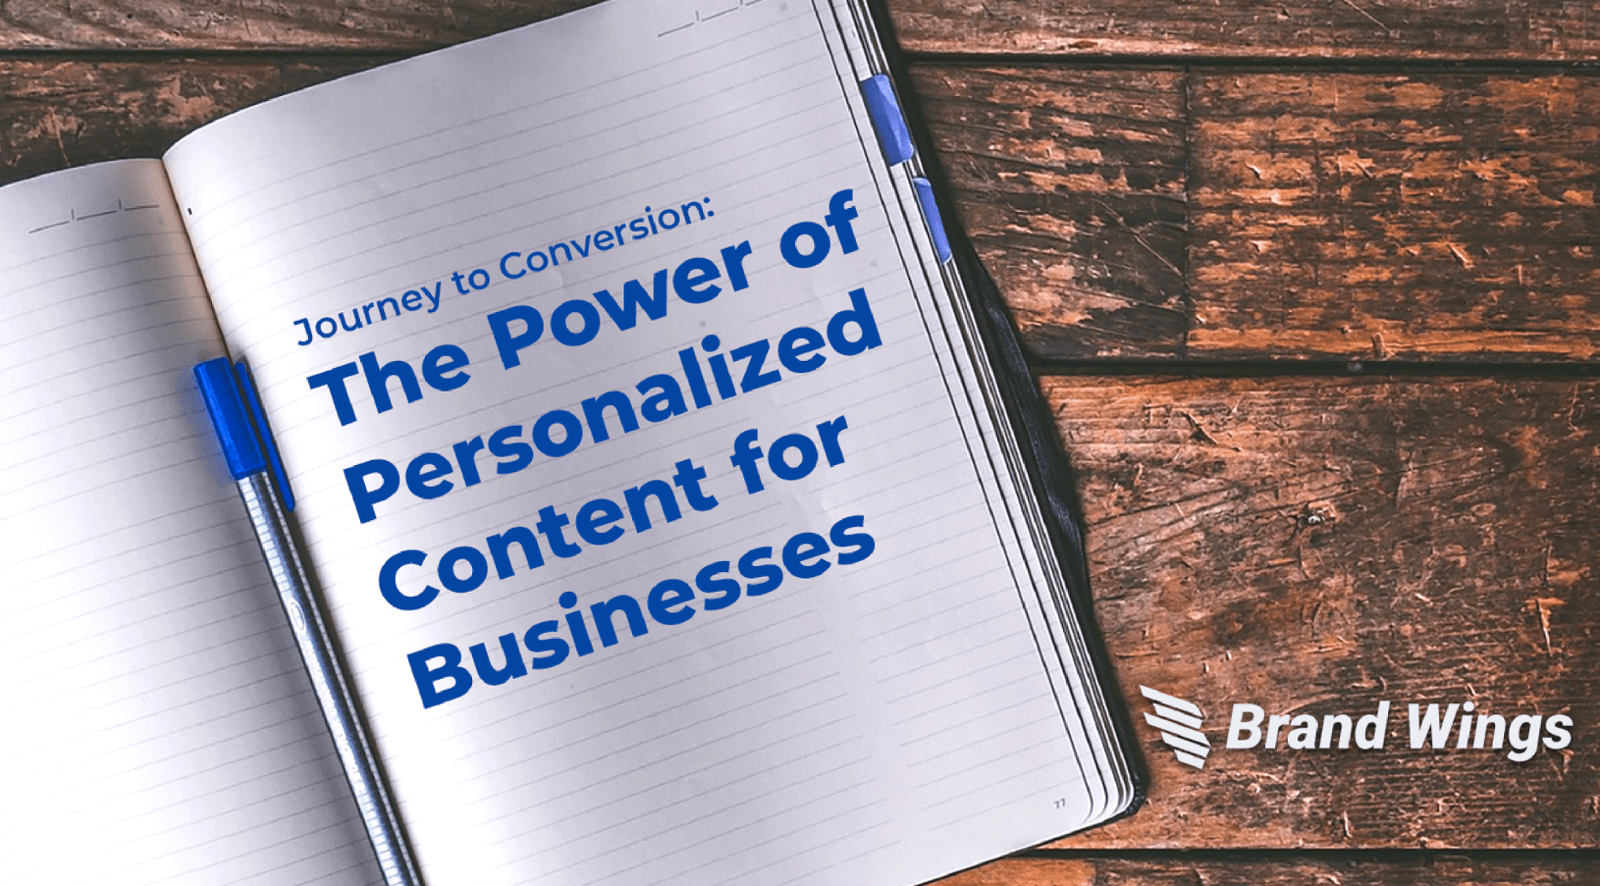 Journey to Conversion: The Power of Personalized Content for Businesses